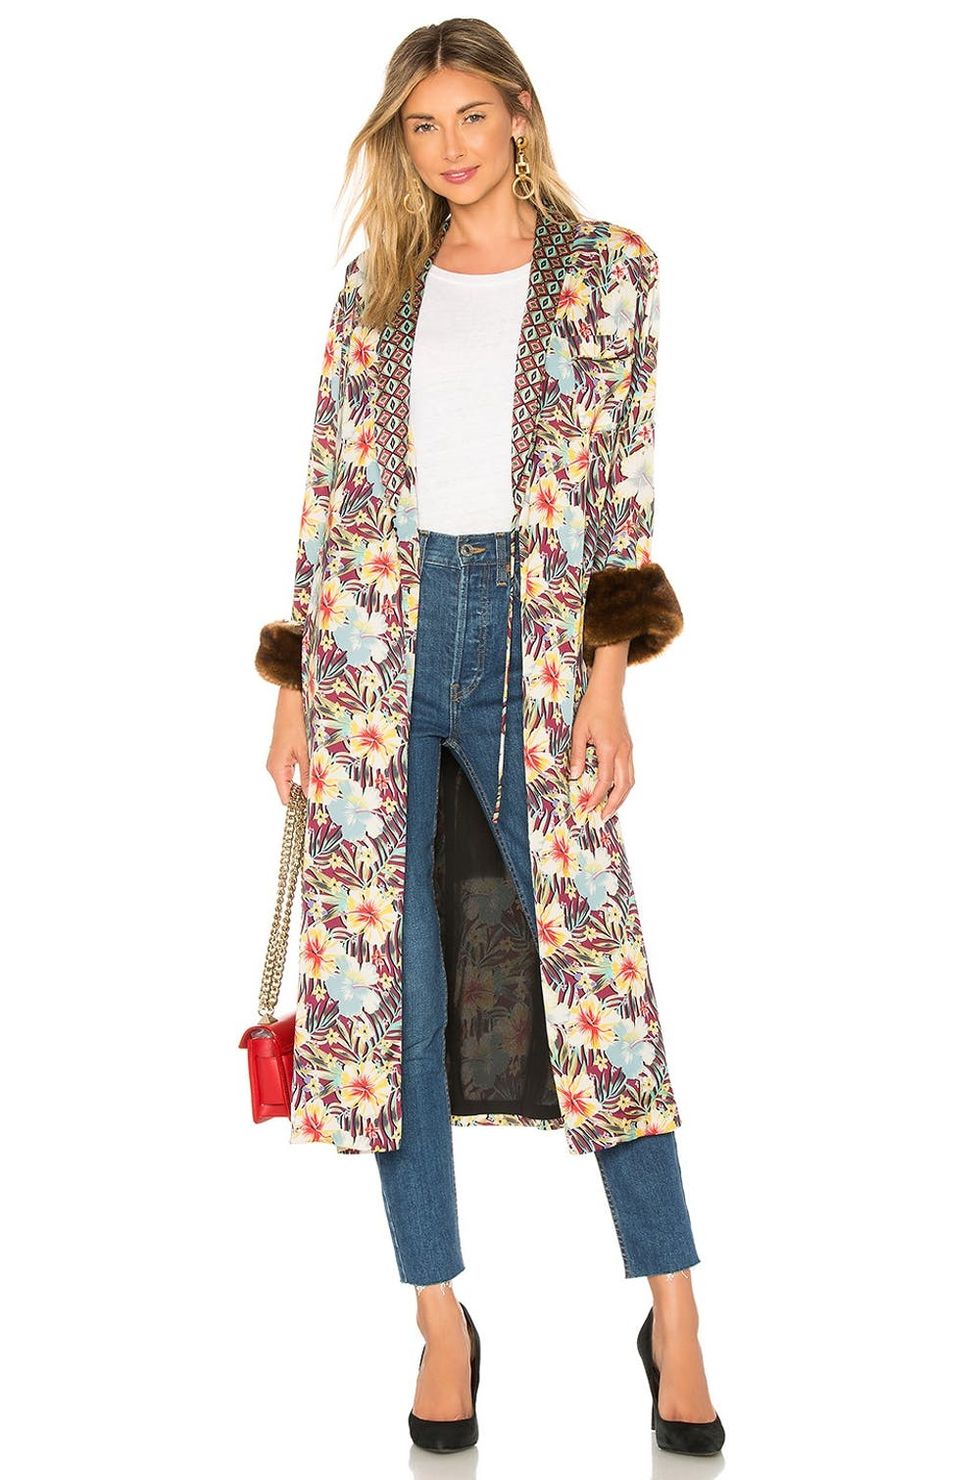 7 Kimonos We Can’t Get Enough of This Fall - Brit + Co